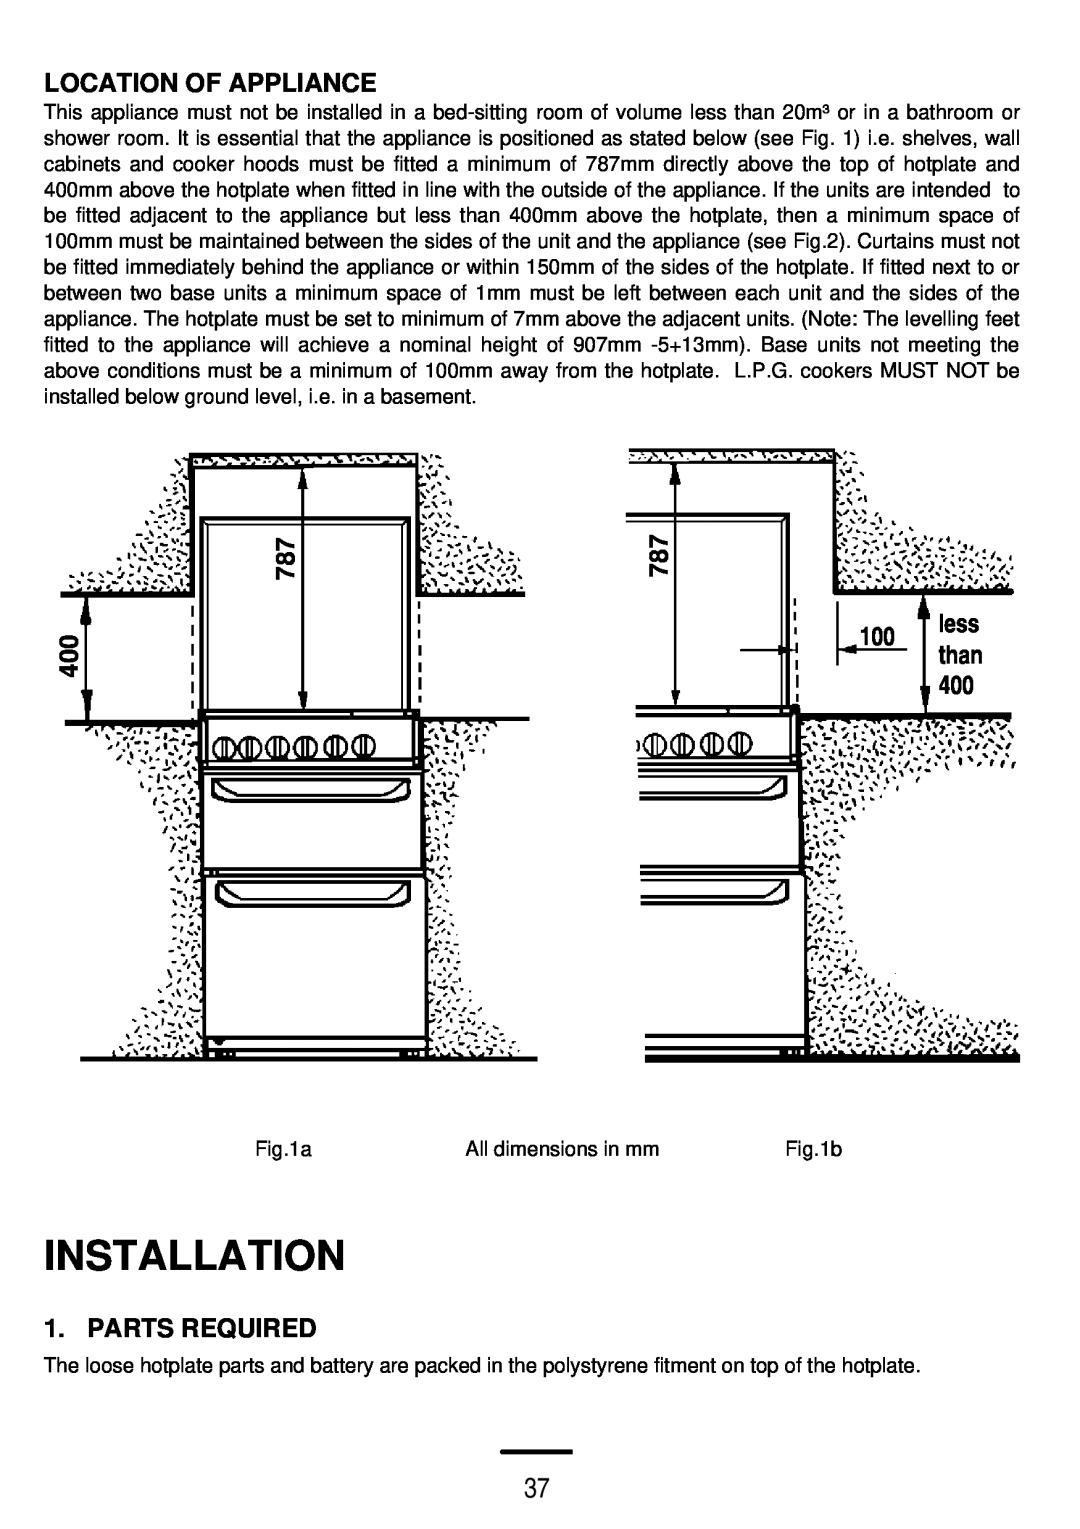 Parkinson Cowan SONATA 50GX installation instructions Installation, Location Of Appliance, less than, Parts Required 